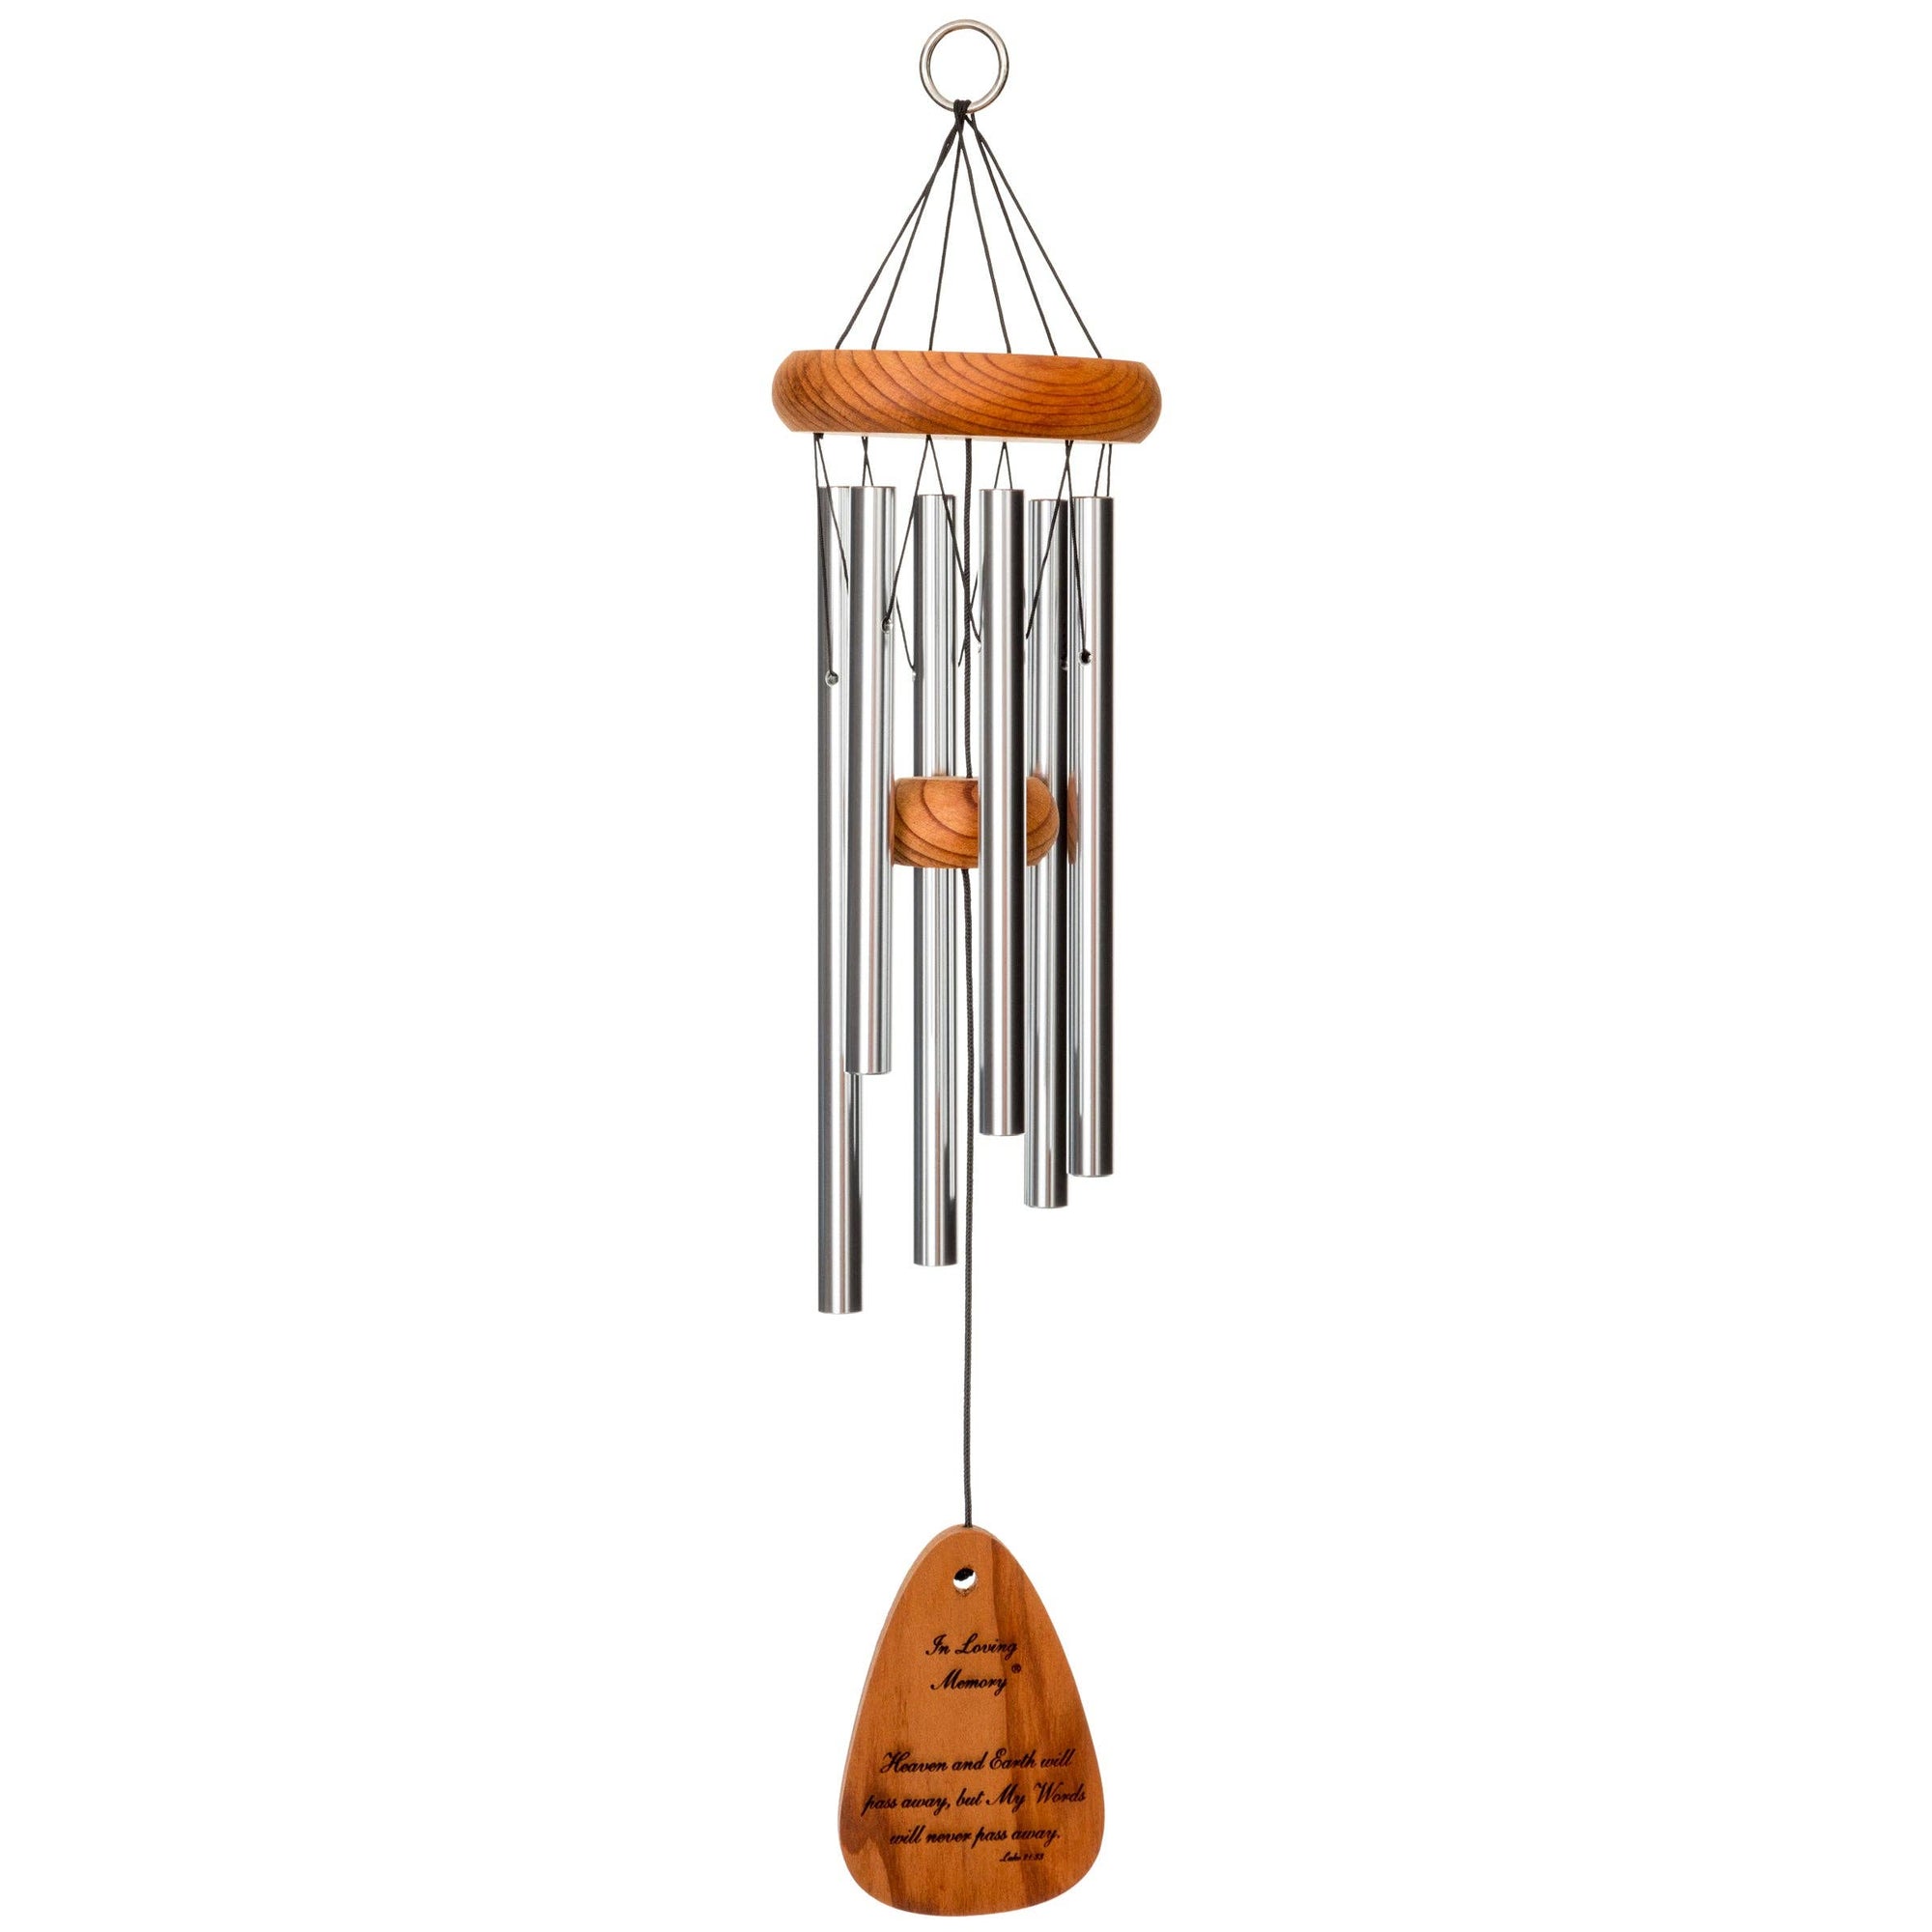 An In Loving Memory® Silver 18-inch Windchime made of American redwood and metal object with custom laser engraving.